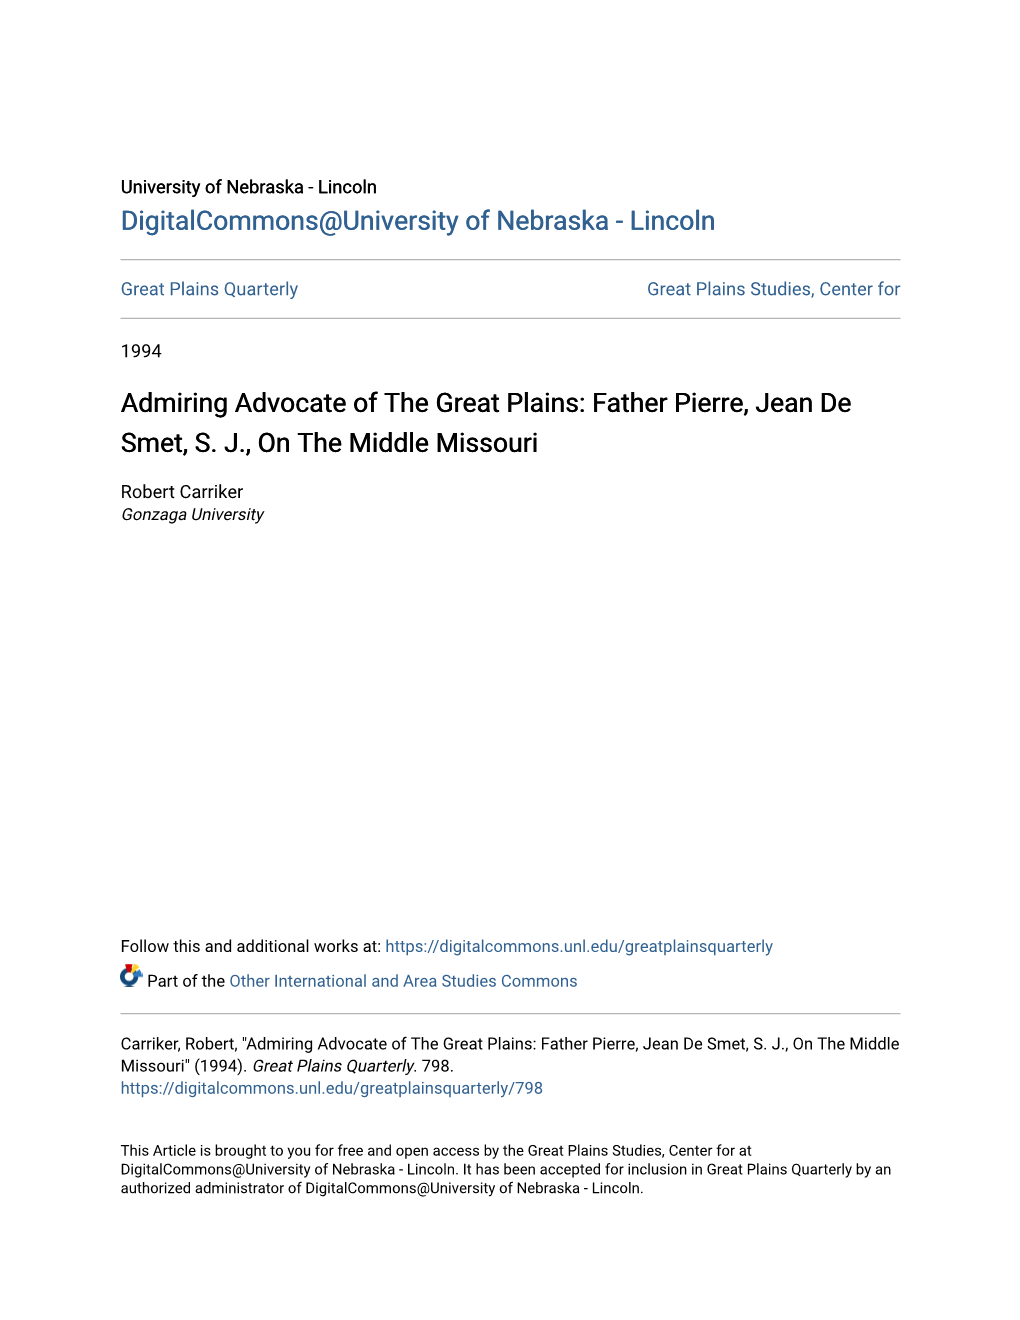 Admiring Advocate of the Great Plains: Father Pierre, Jean De Smet, S